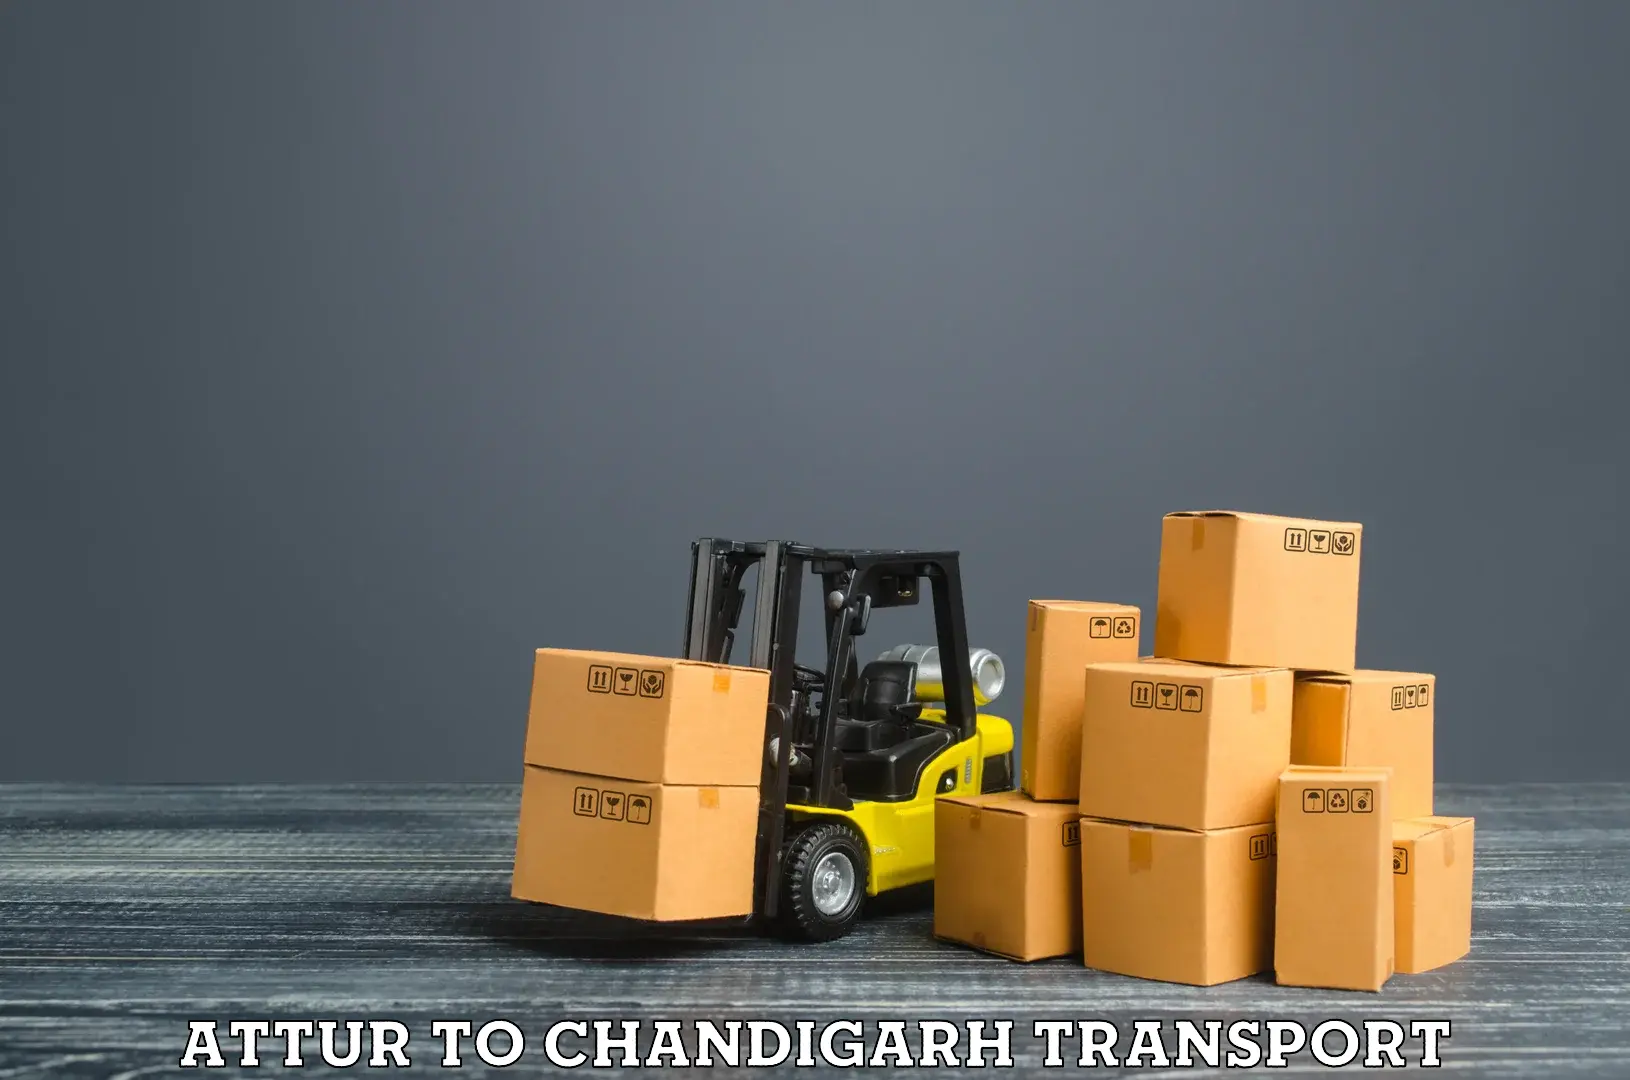 Transport bike from one state to another Attur to Chandigarh